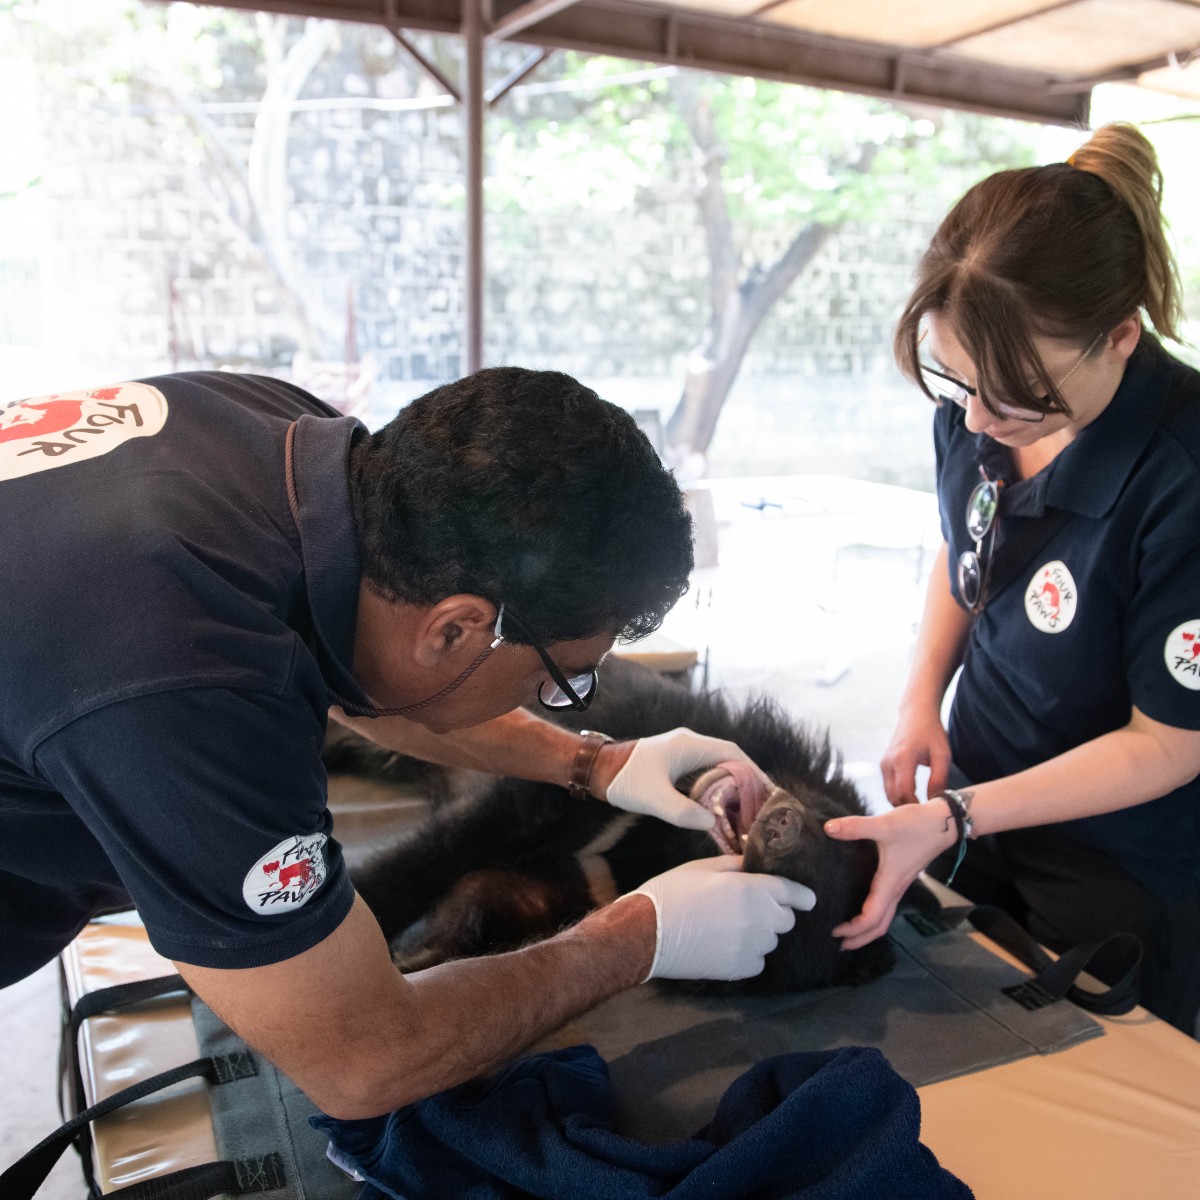 Our team have been working hard to provide urgent veterinary help to 8 bears that were subjected to cruelty as dancing or baiting bears. Their difficult past has certainly left its mark, but we're pleased they've now got a second chance at life! Stay tuned for updates!